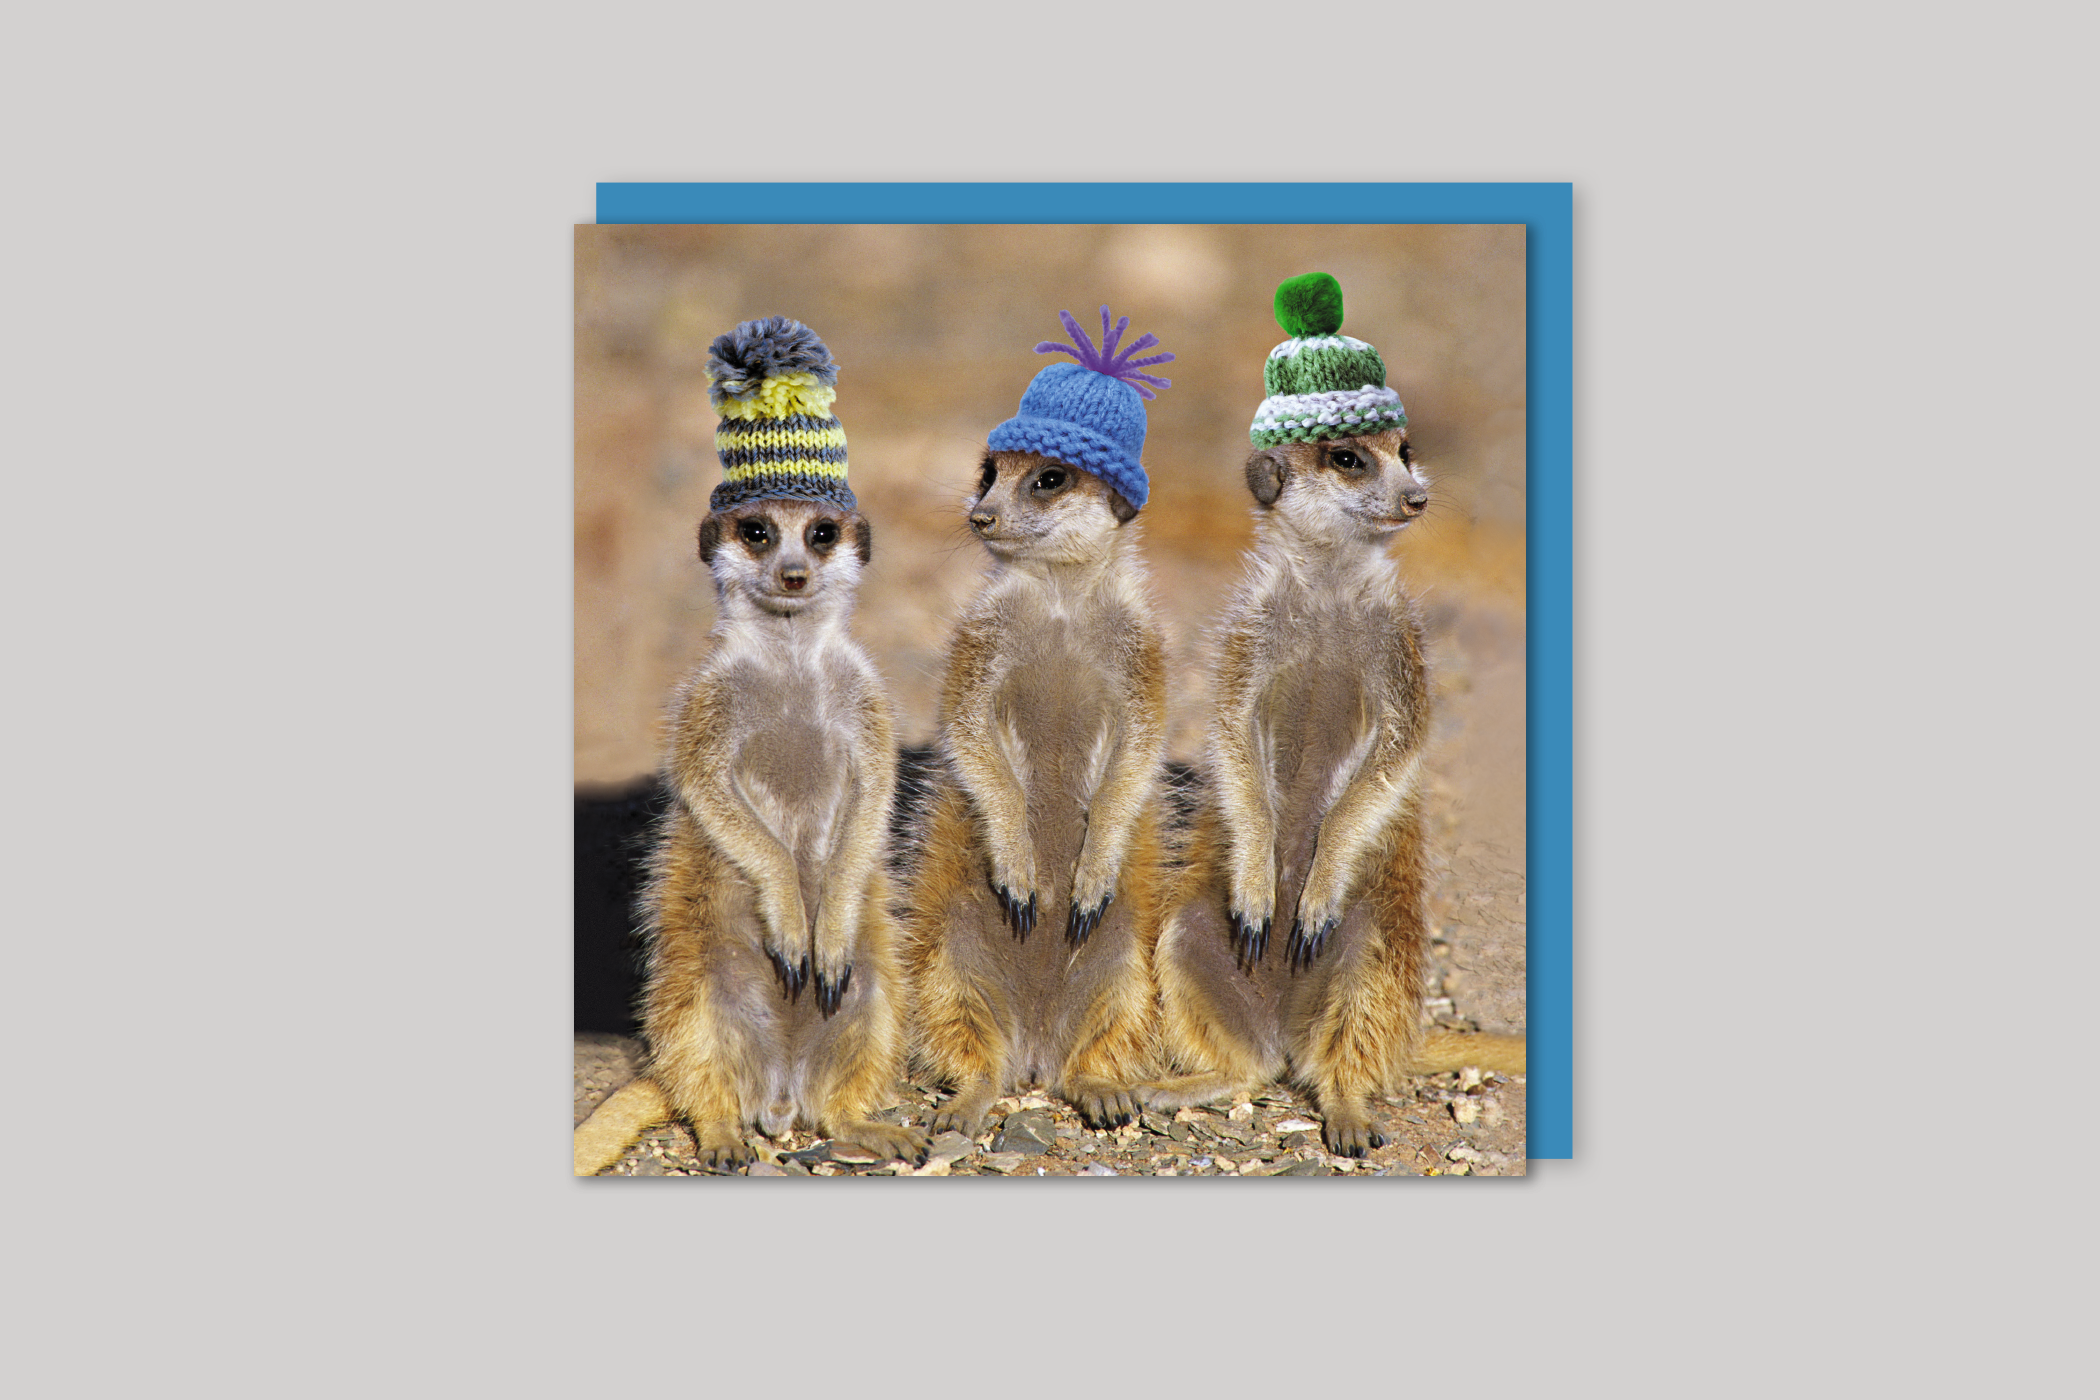 Meerkats in Hats from Exposure range of photographic cards by Icon, back page.